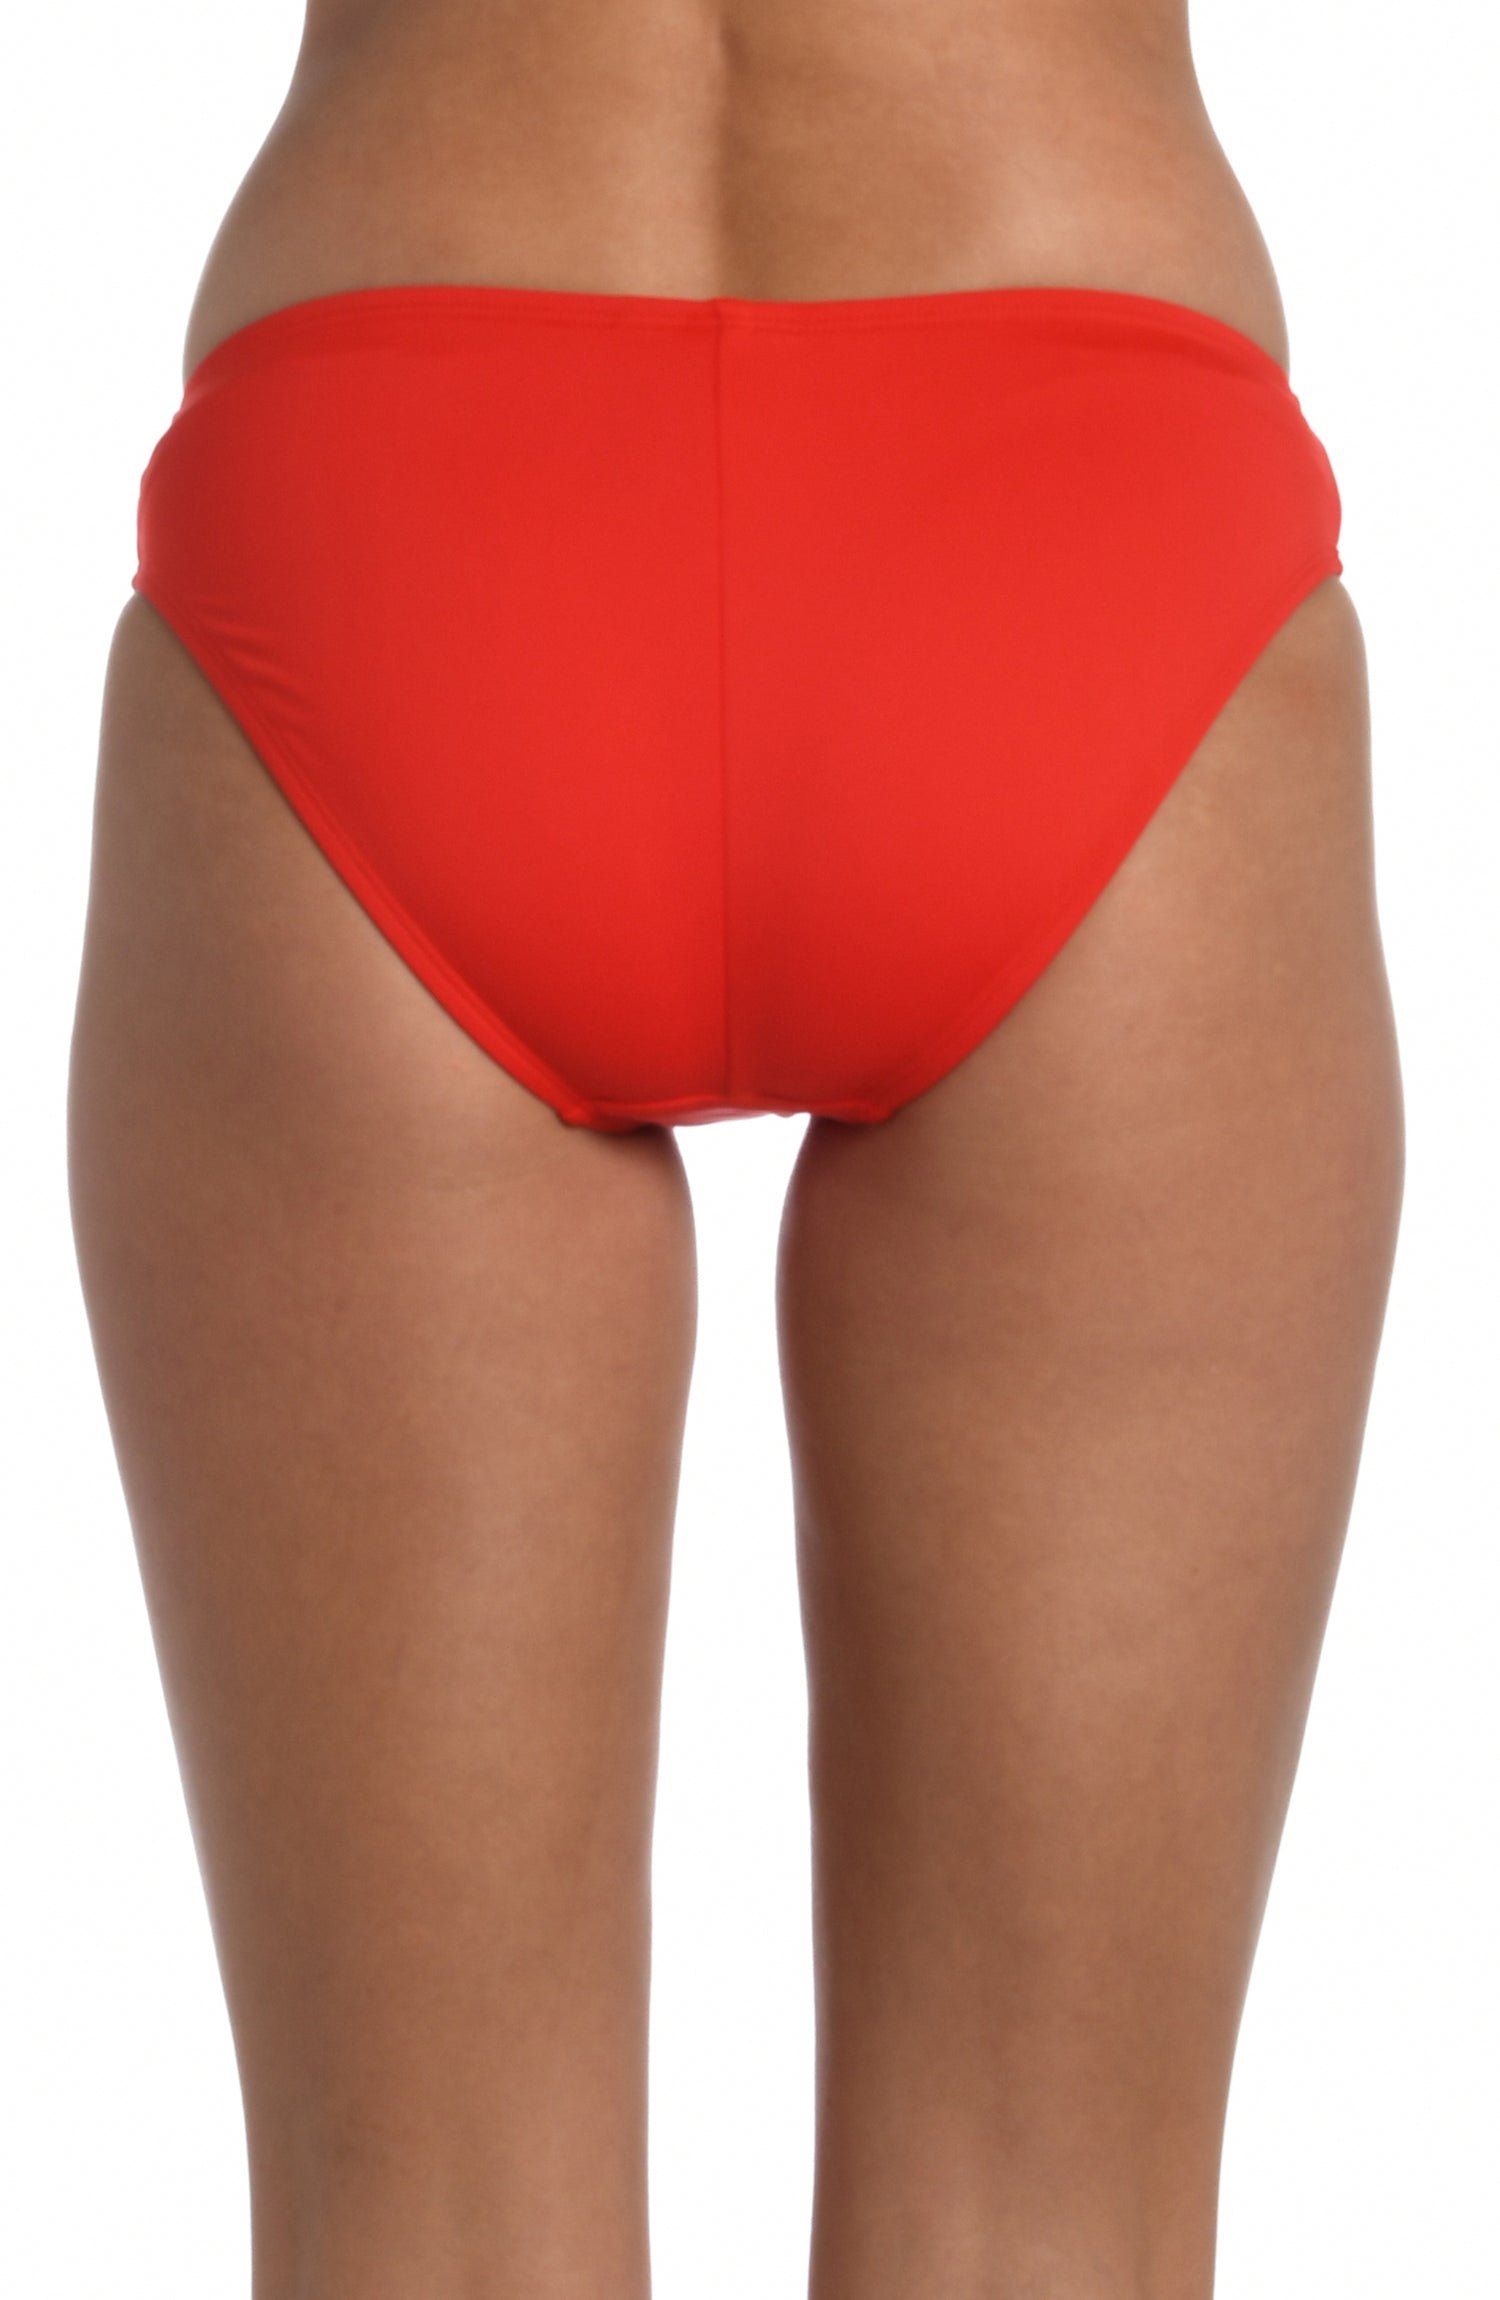 Model is wearing a cherry colored hipster swimsuit bottom from our Best-Selling Island Goddess collection.